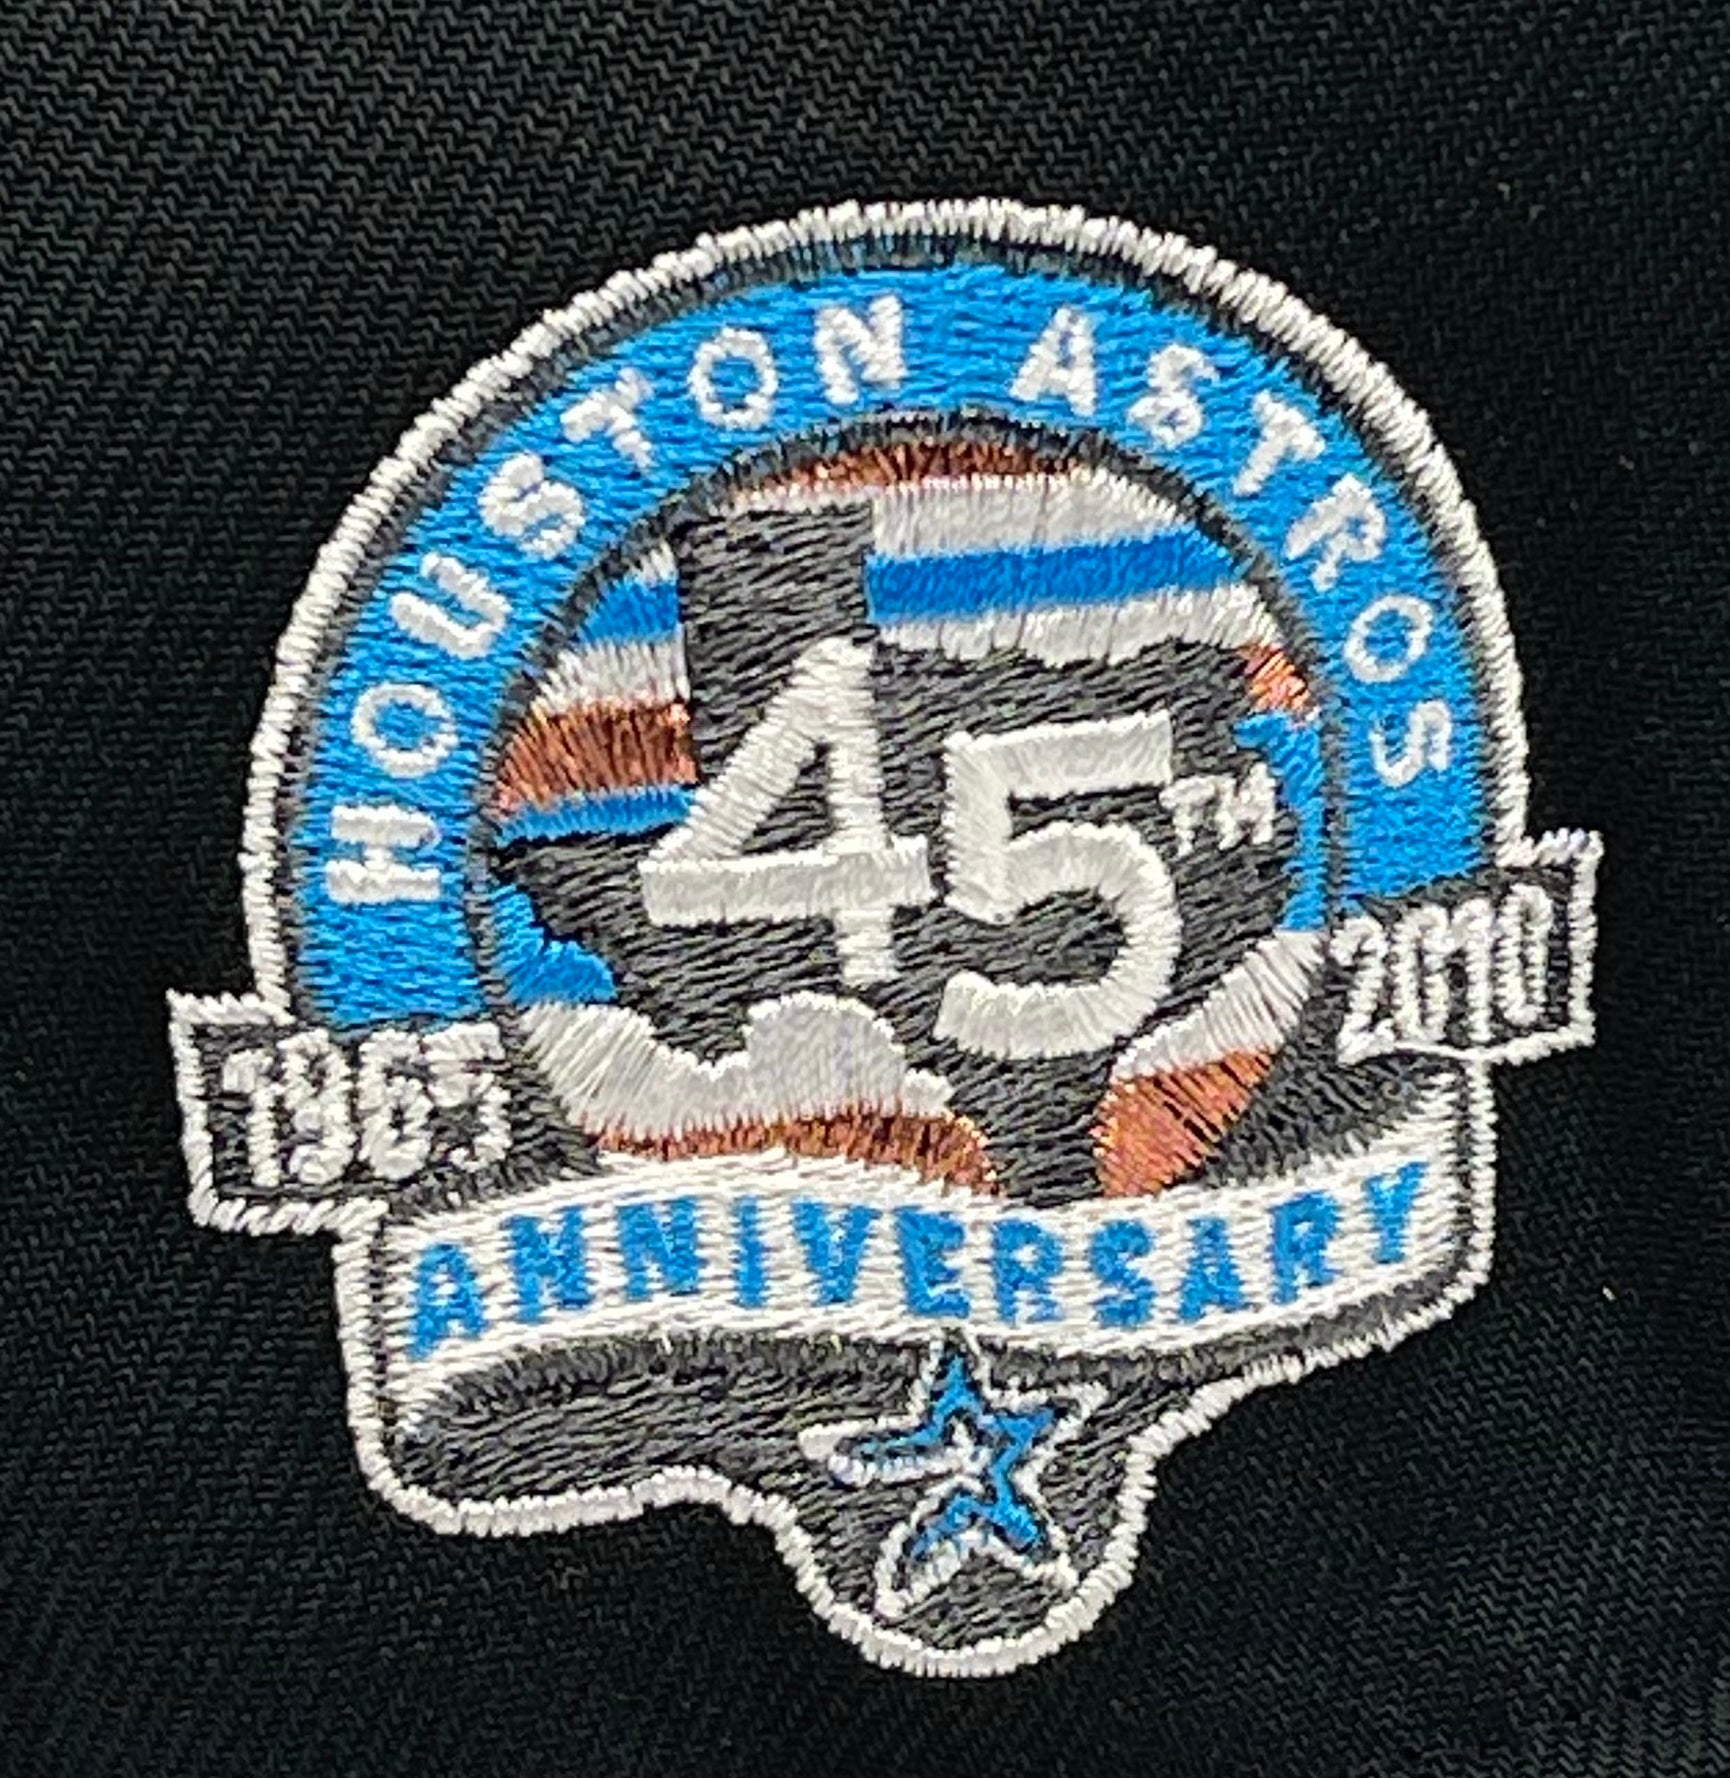 HOUSTON ASTROS “45TH ANNIVERSARY” NEW ERA 59FIFTY FITTED (CERULEAN BLUE BOTTOM)